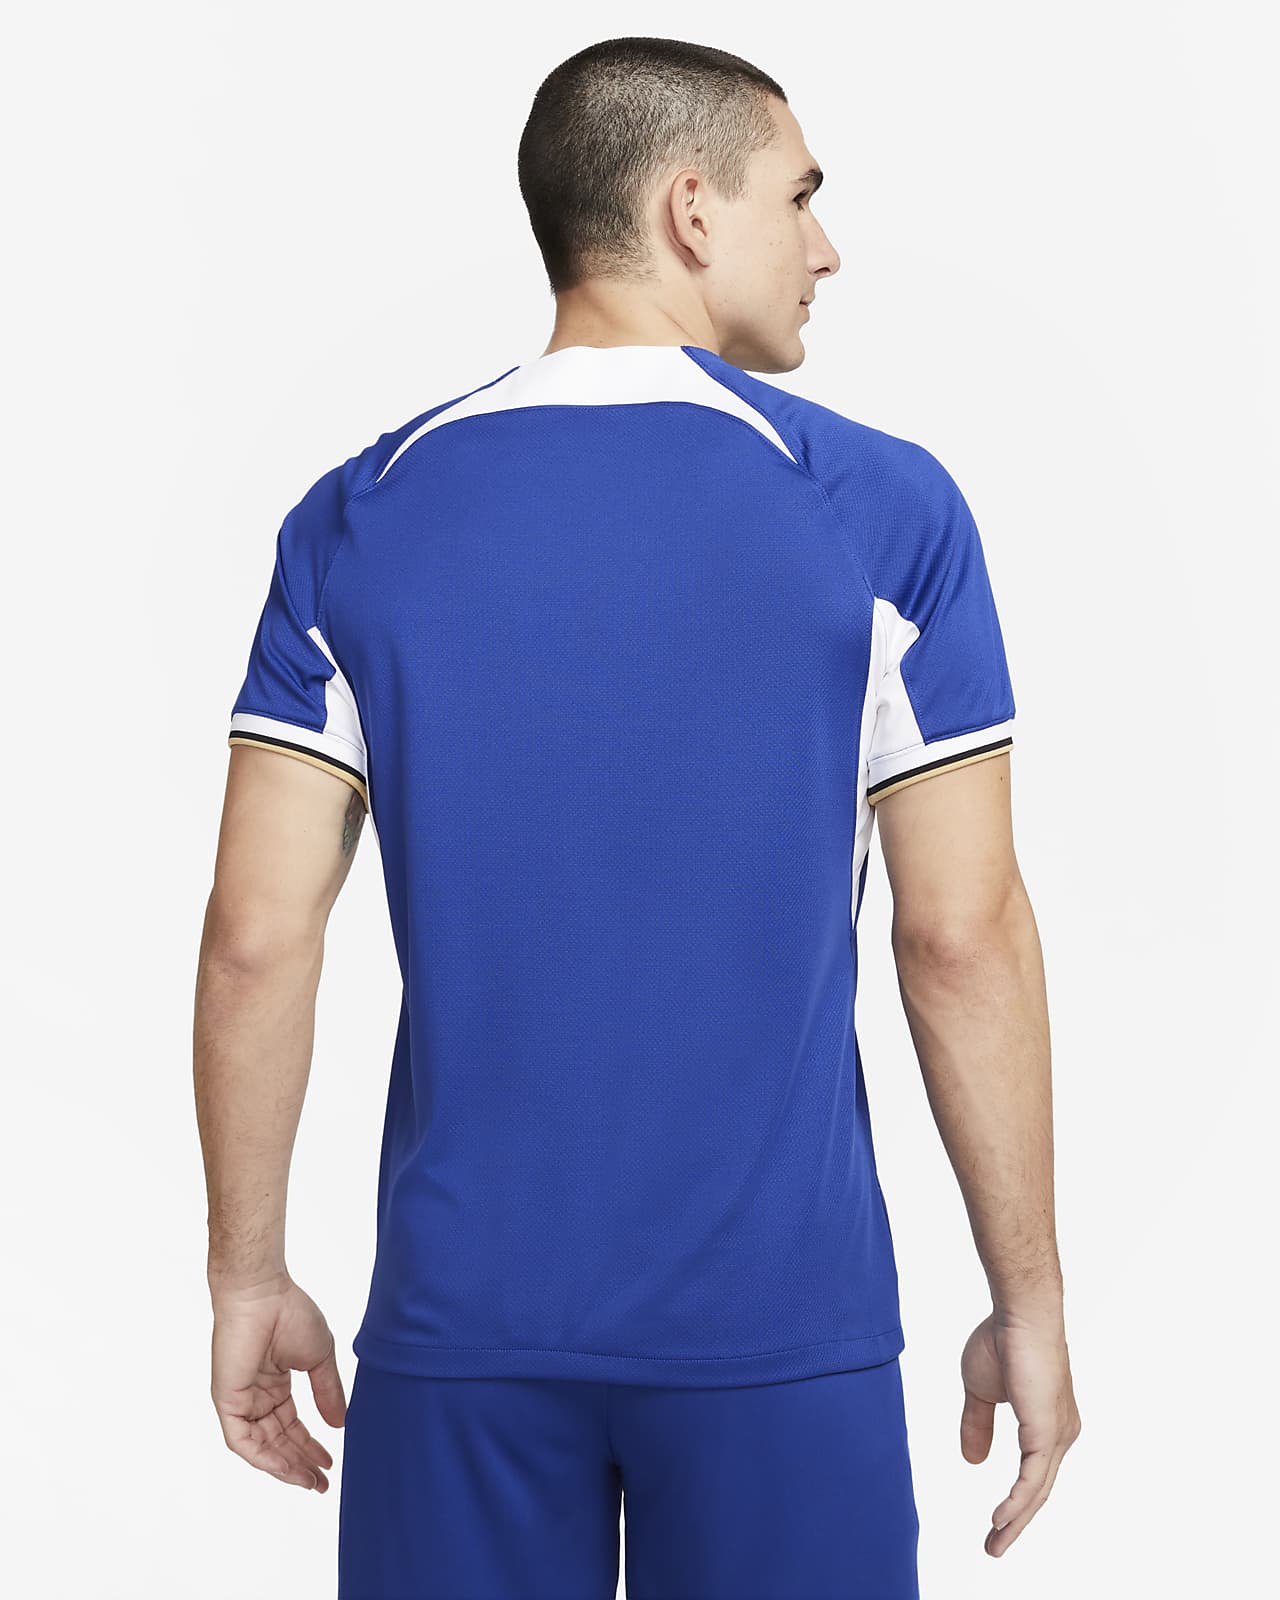 Chelsea Release 22/23 Third Shirt From Nike - SoccerBible